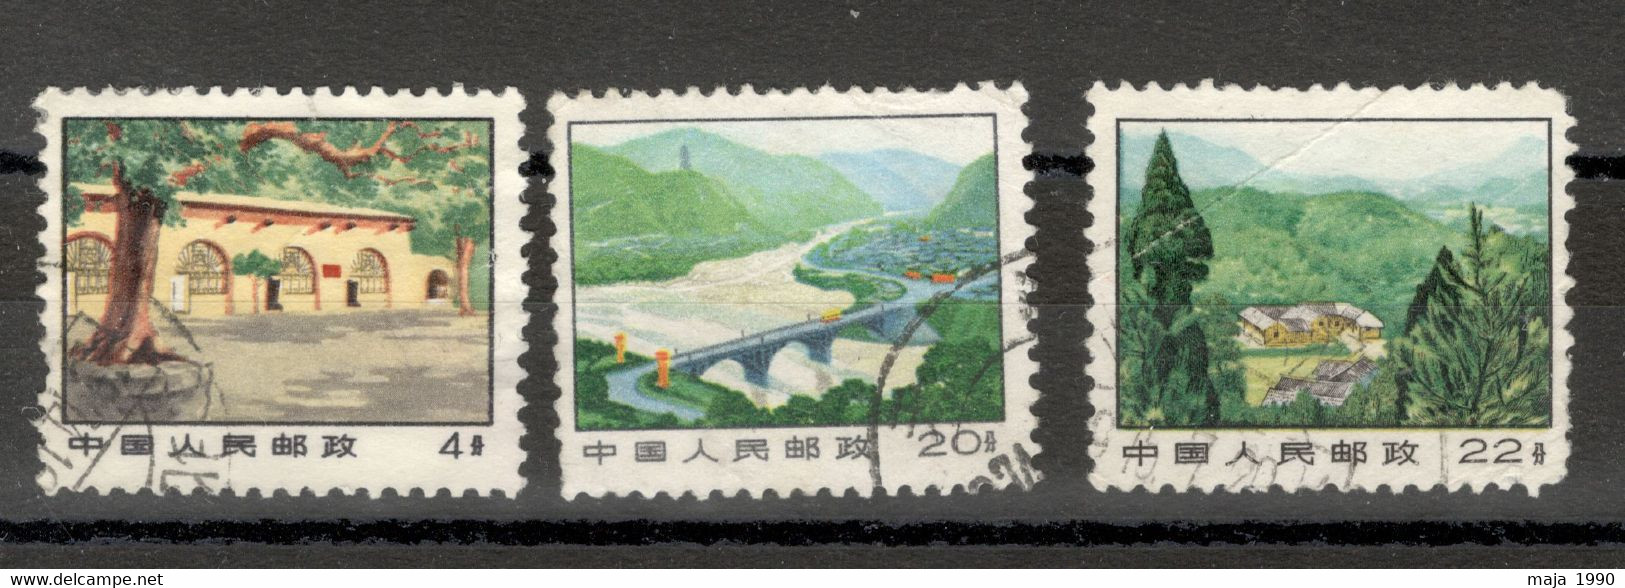 CHINA  - 3 USED STAMPS - REVOLUTIONARY SITES - 1971. - Oblitérés